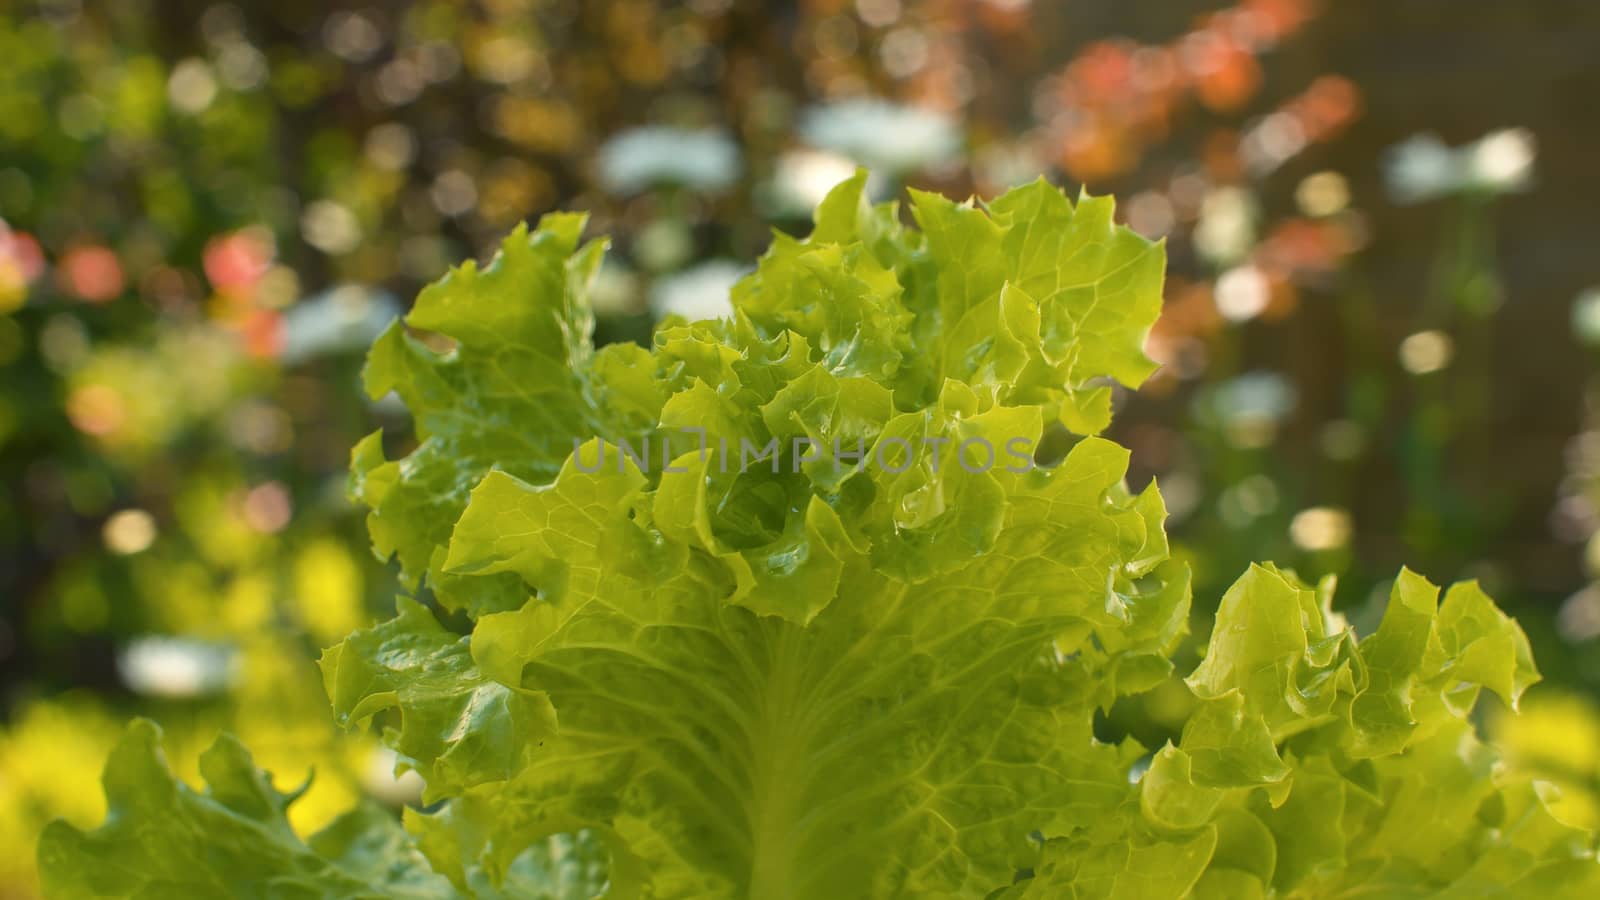 Close up green fresh lettuce on the table outdoors slowly rotating on blurry natural background. Macro shooting food in a country farm. Healthy fresh food concept